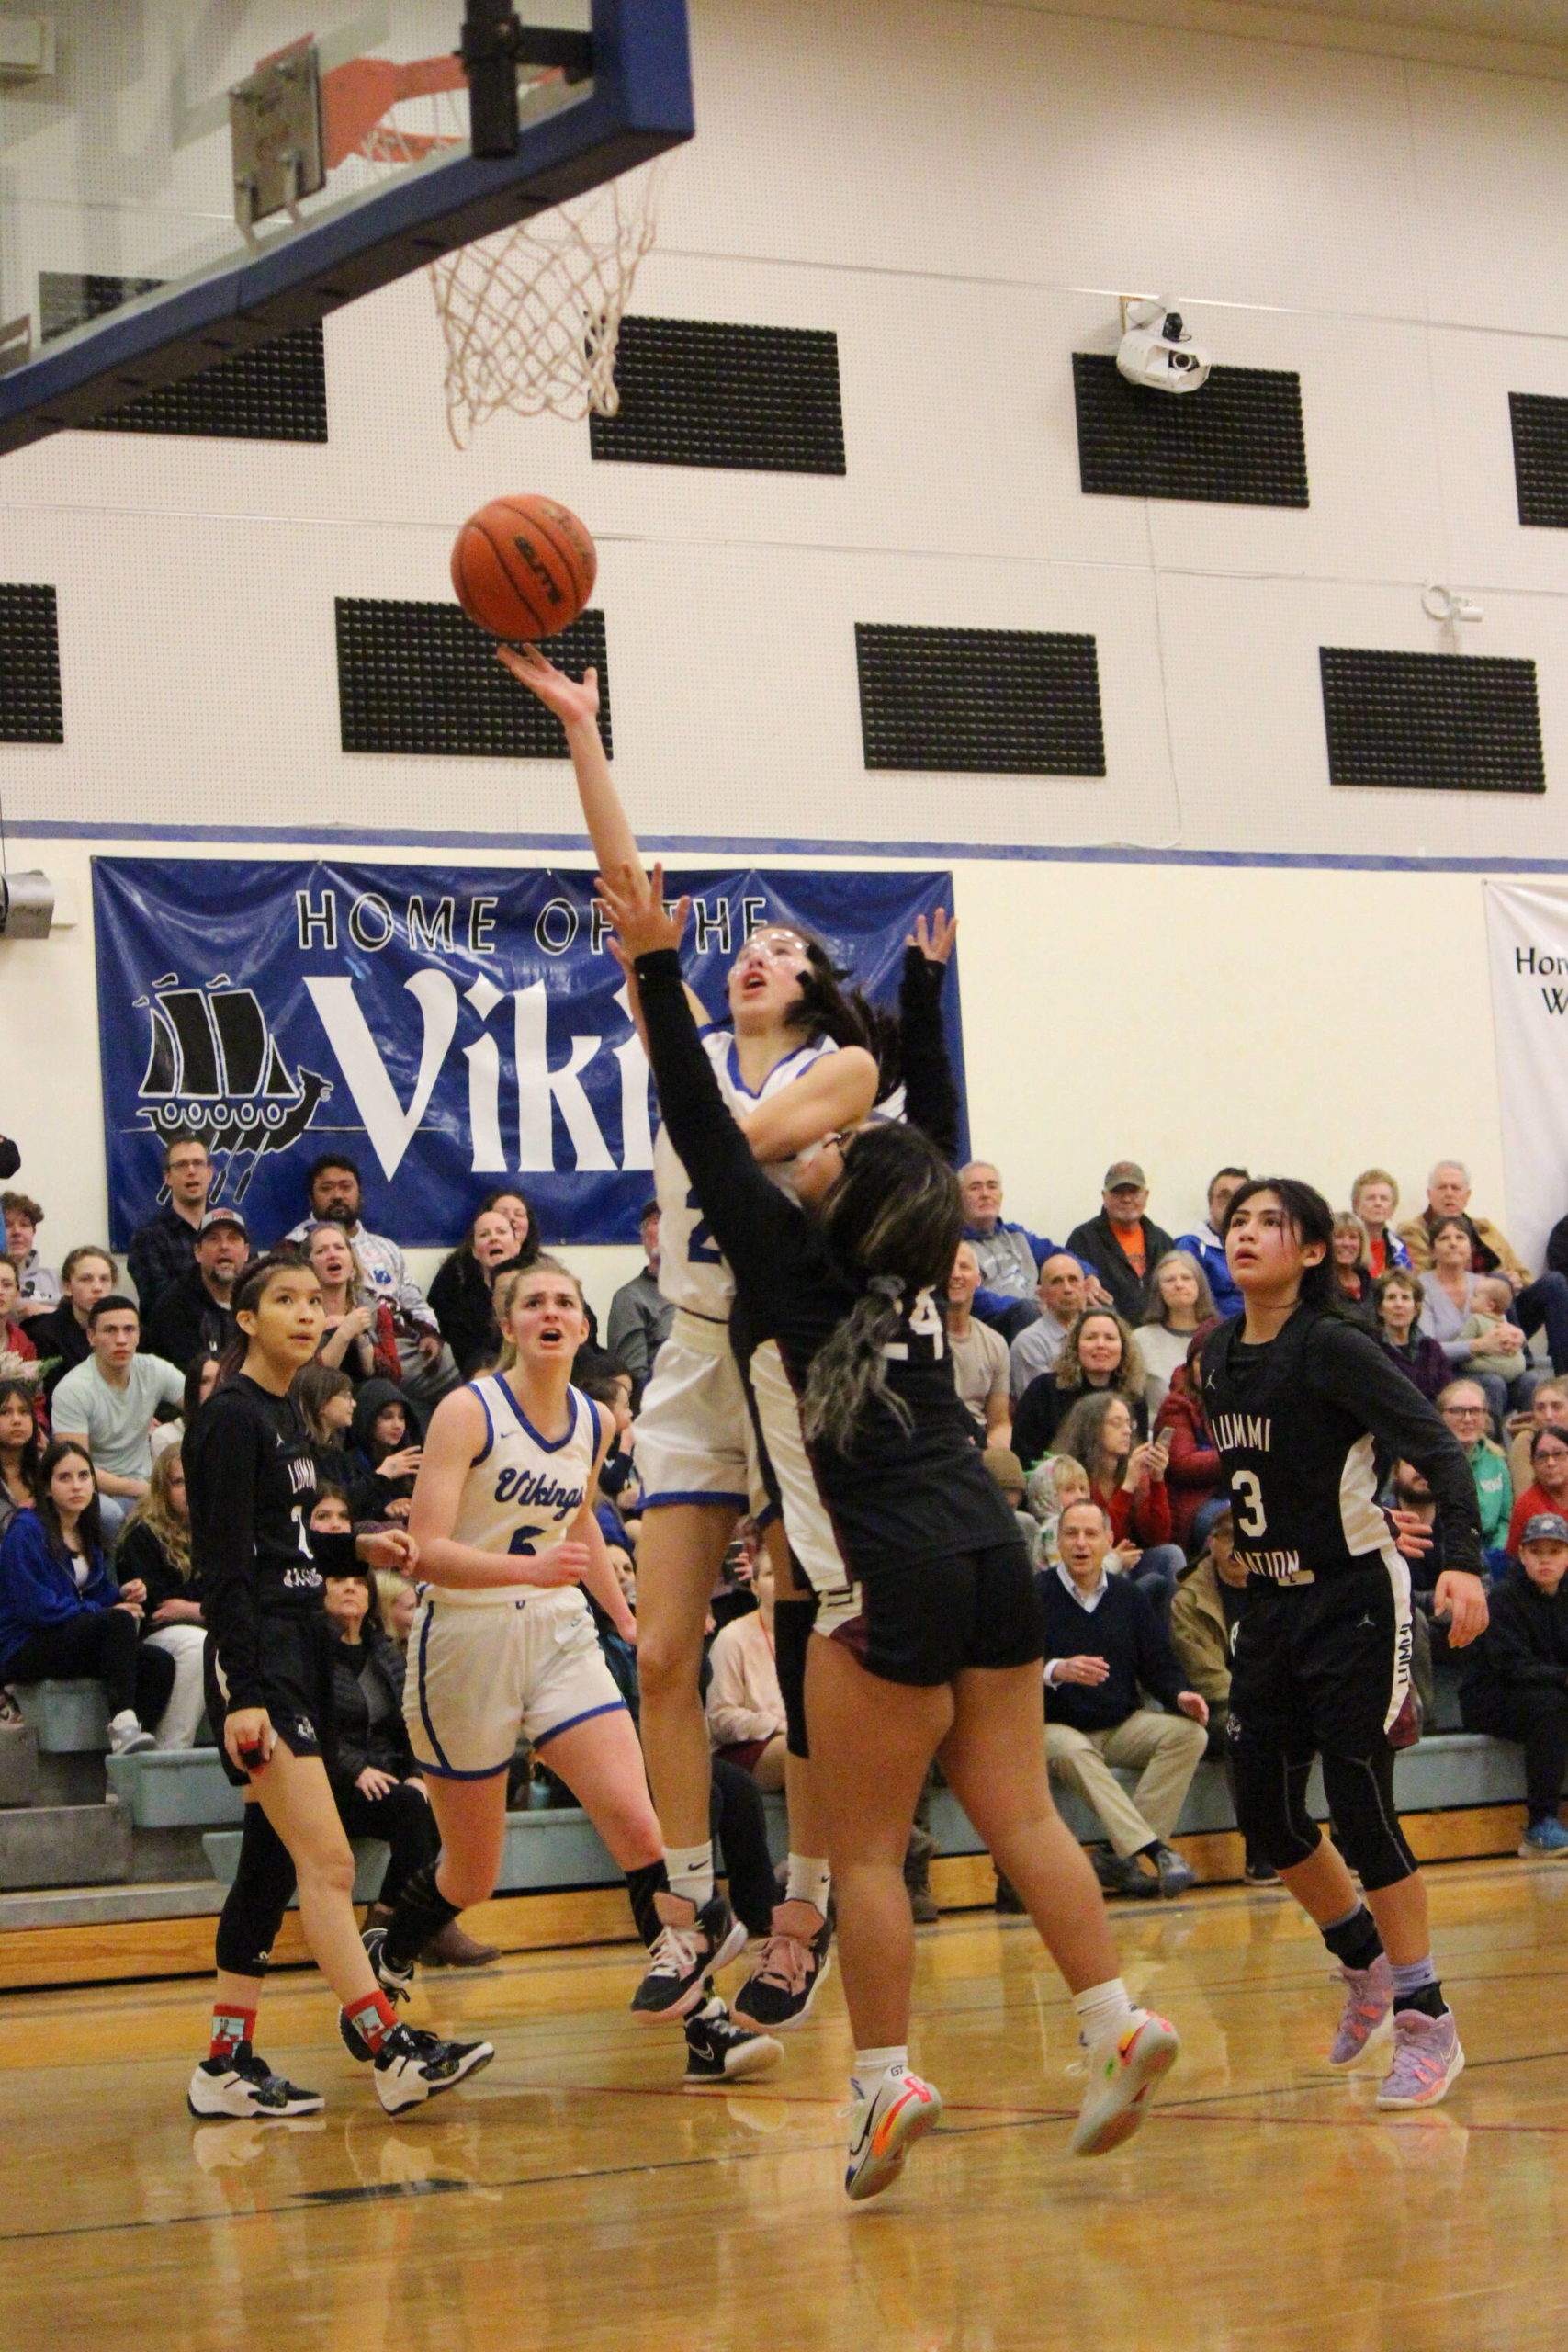 Corey Wiscomb photo.
Ava Ashcraft completes a tough drive to the hoop.